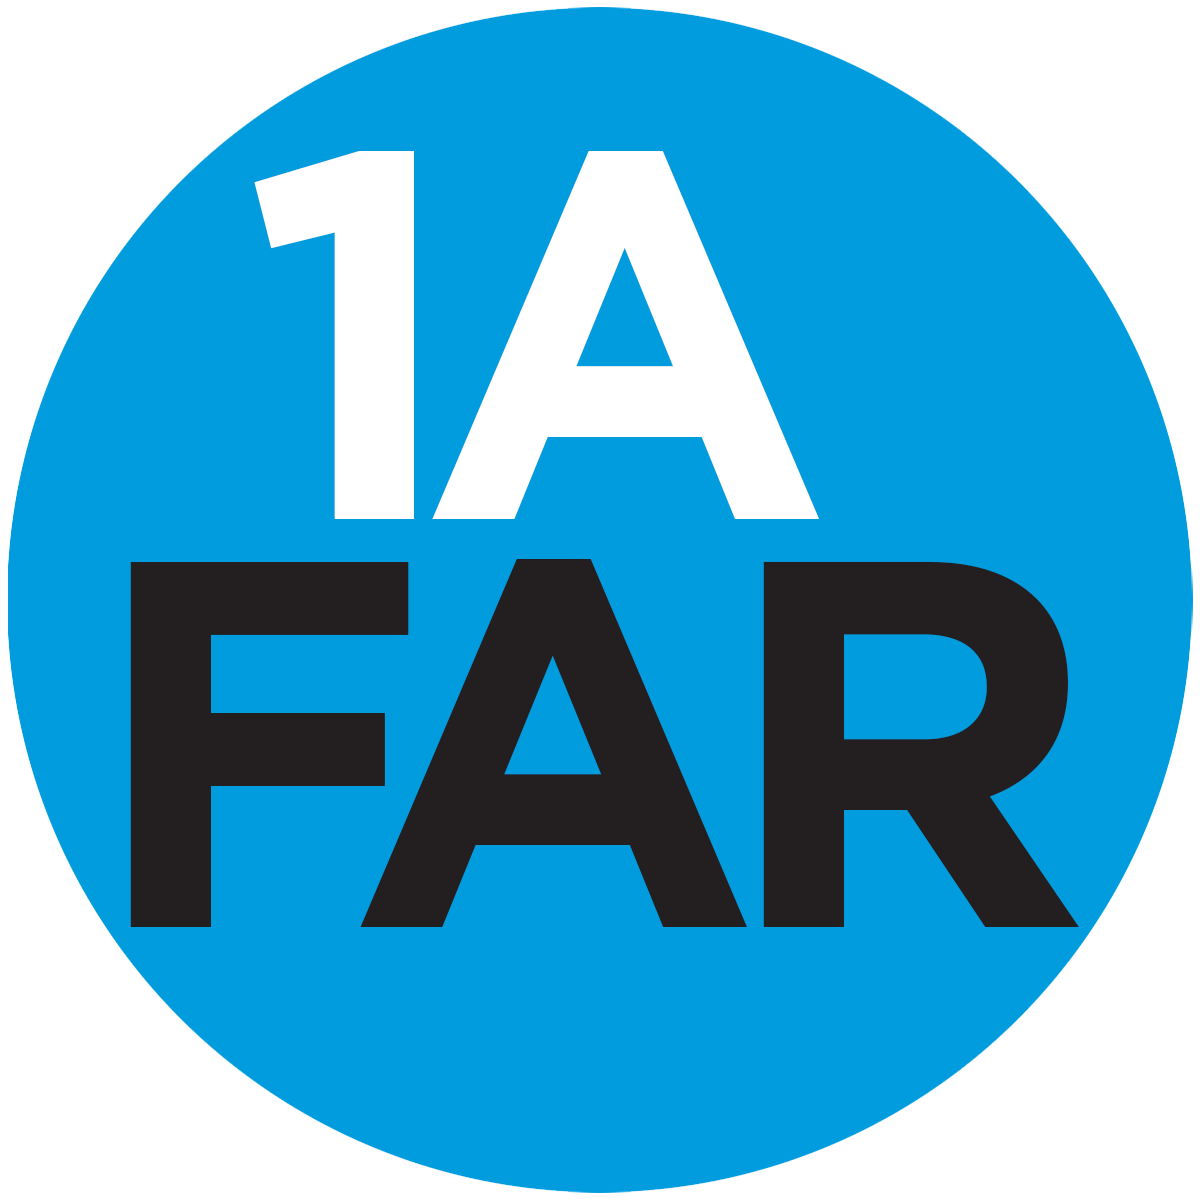 Blue circle with text that reads "1A FAR" inside of it.